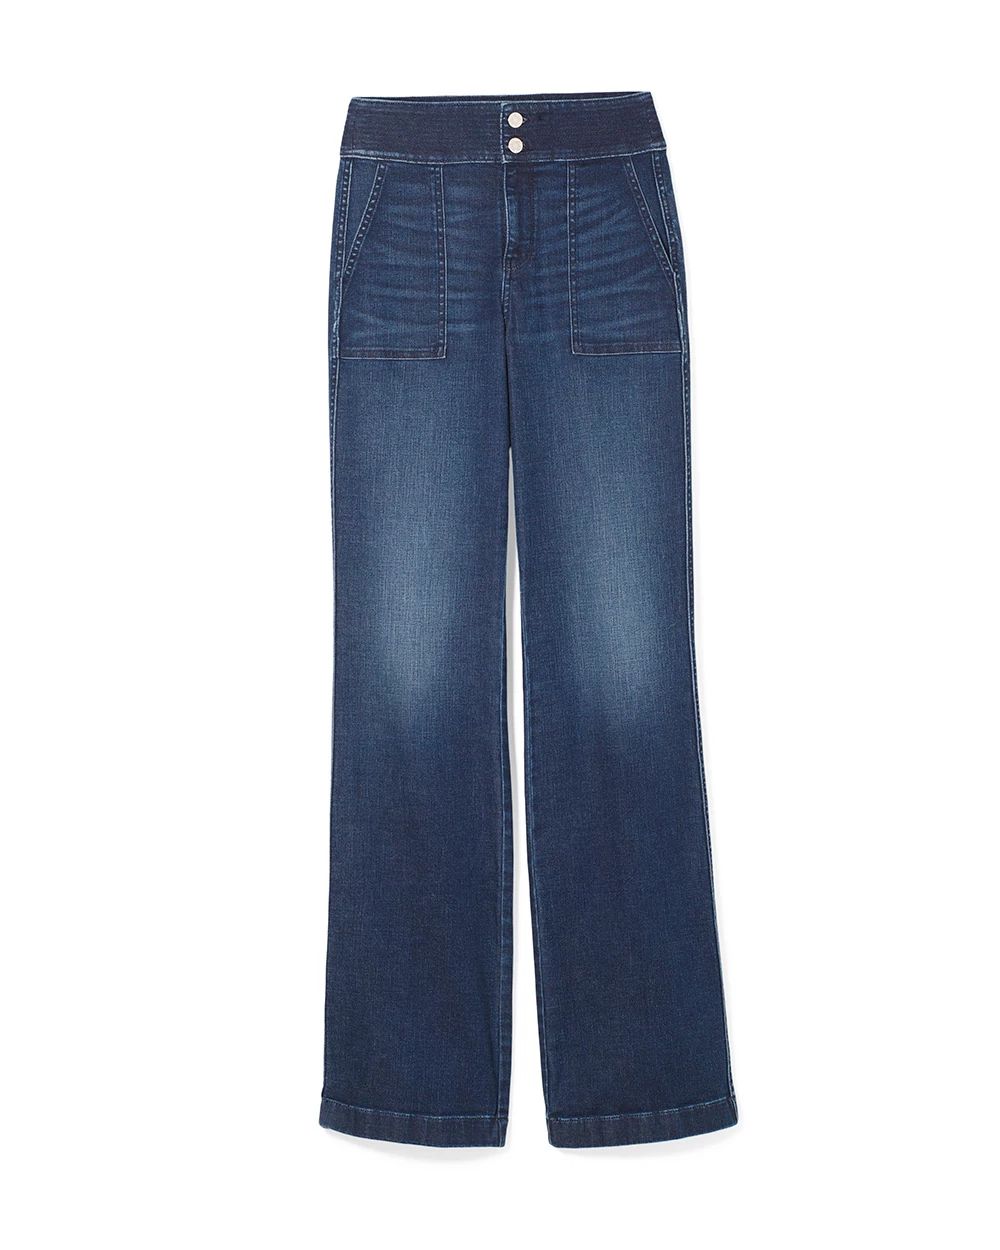 Extra High-Rise Everyday Soft Denim  Trupunto Trouser Jeans click to view larger image.